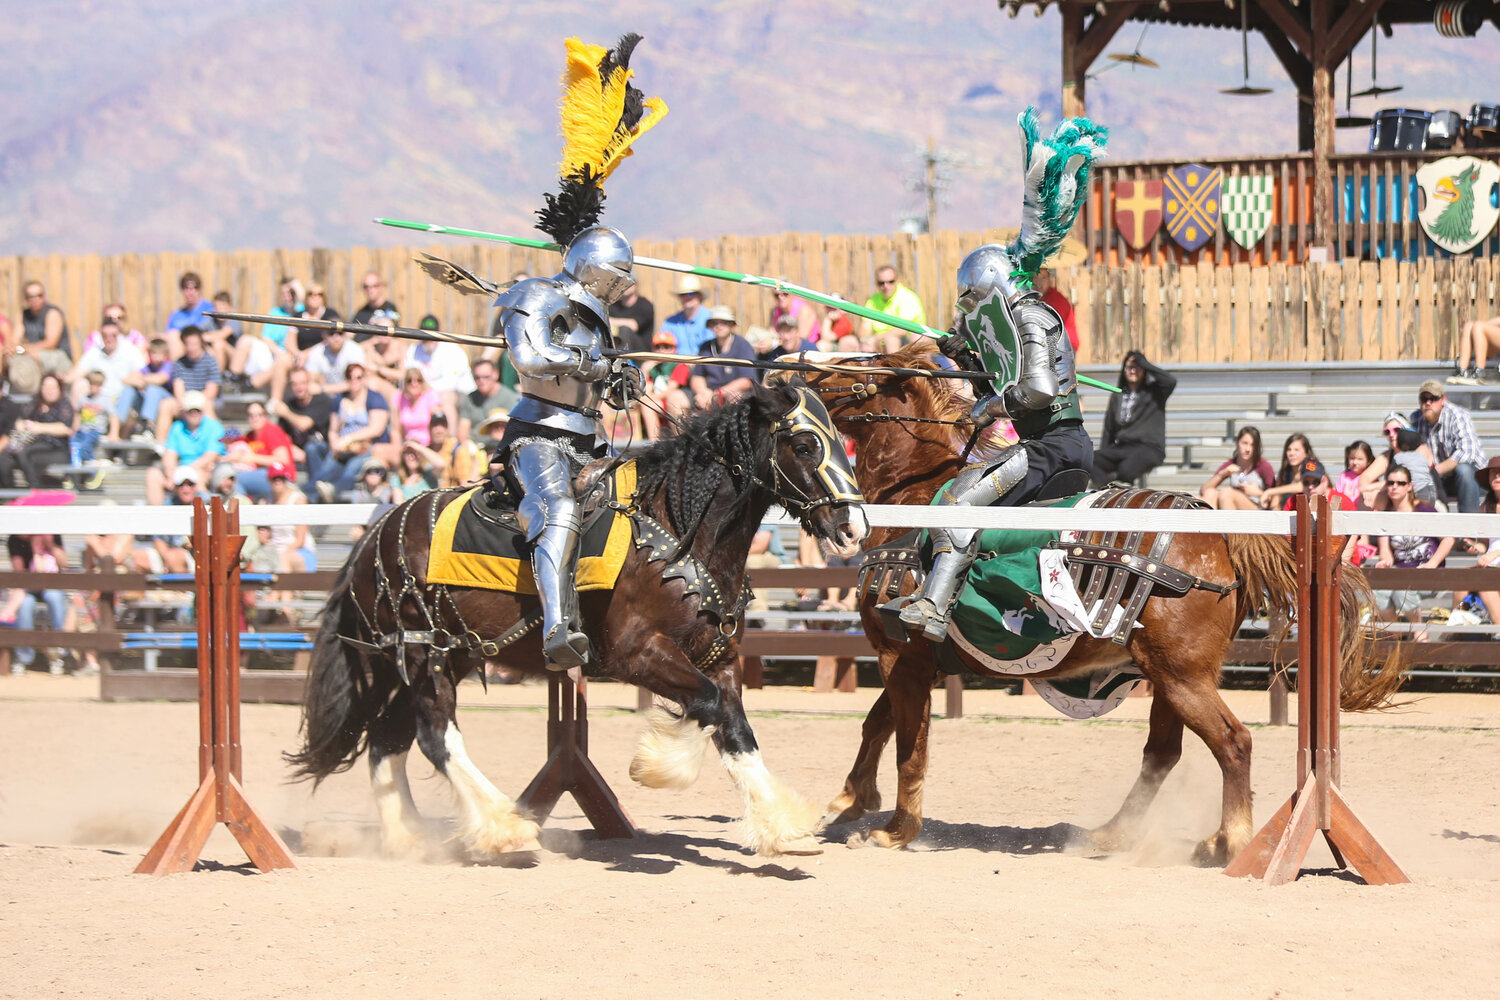 The live jousting tournaments are one of the festival’s most popular attractions. Armored knights on charging steeds take up their lances and battle for the queen’s honor. Cheer on your favorite armored knight at one of the three daily jousting tournaments in a 5,000-seat arena.